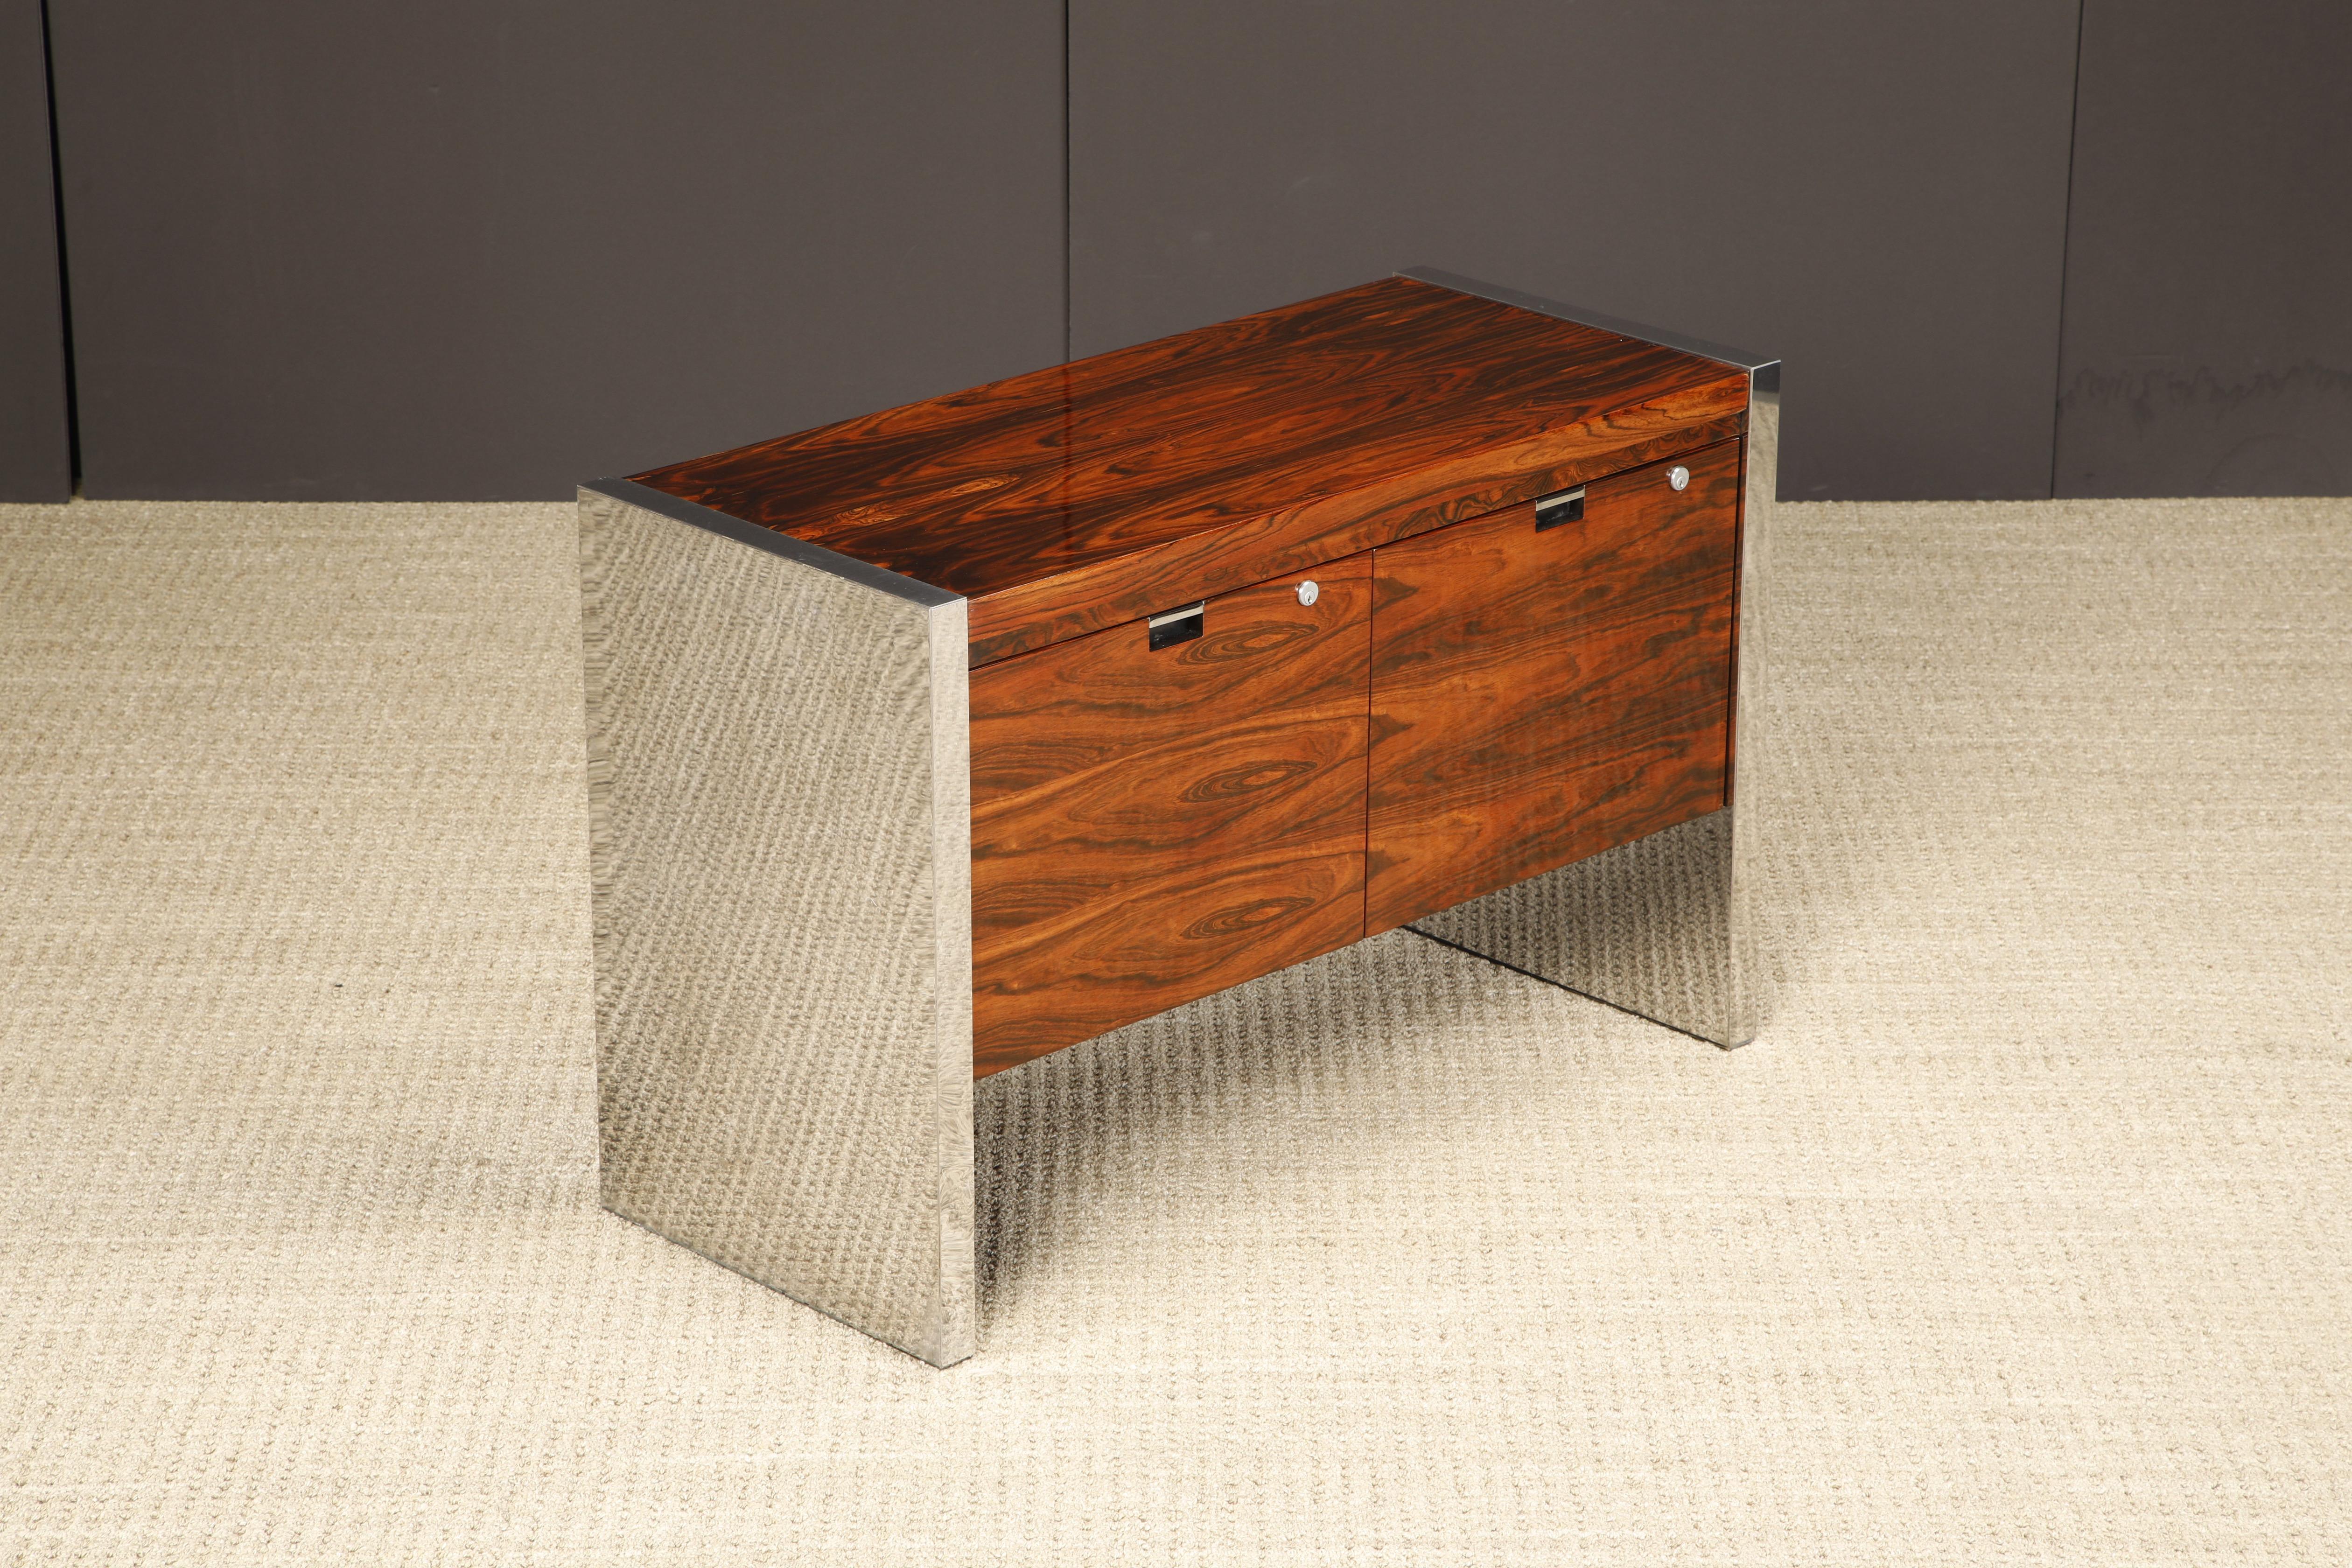 This exotic grained Rosewood and chrome executive credenza by Roger Sprunger for Dunbar features beautifully refinished Rosewood with a pair of signature chrome paneled legs, designed and made in the 1970s. Signed with Dunbar tag as can be seen in